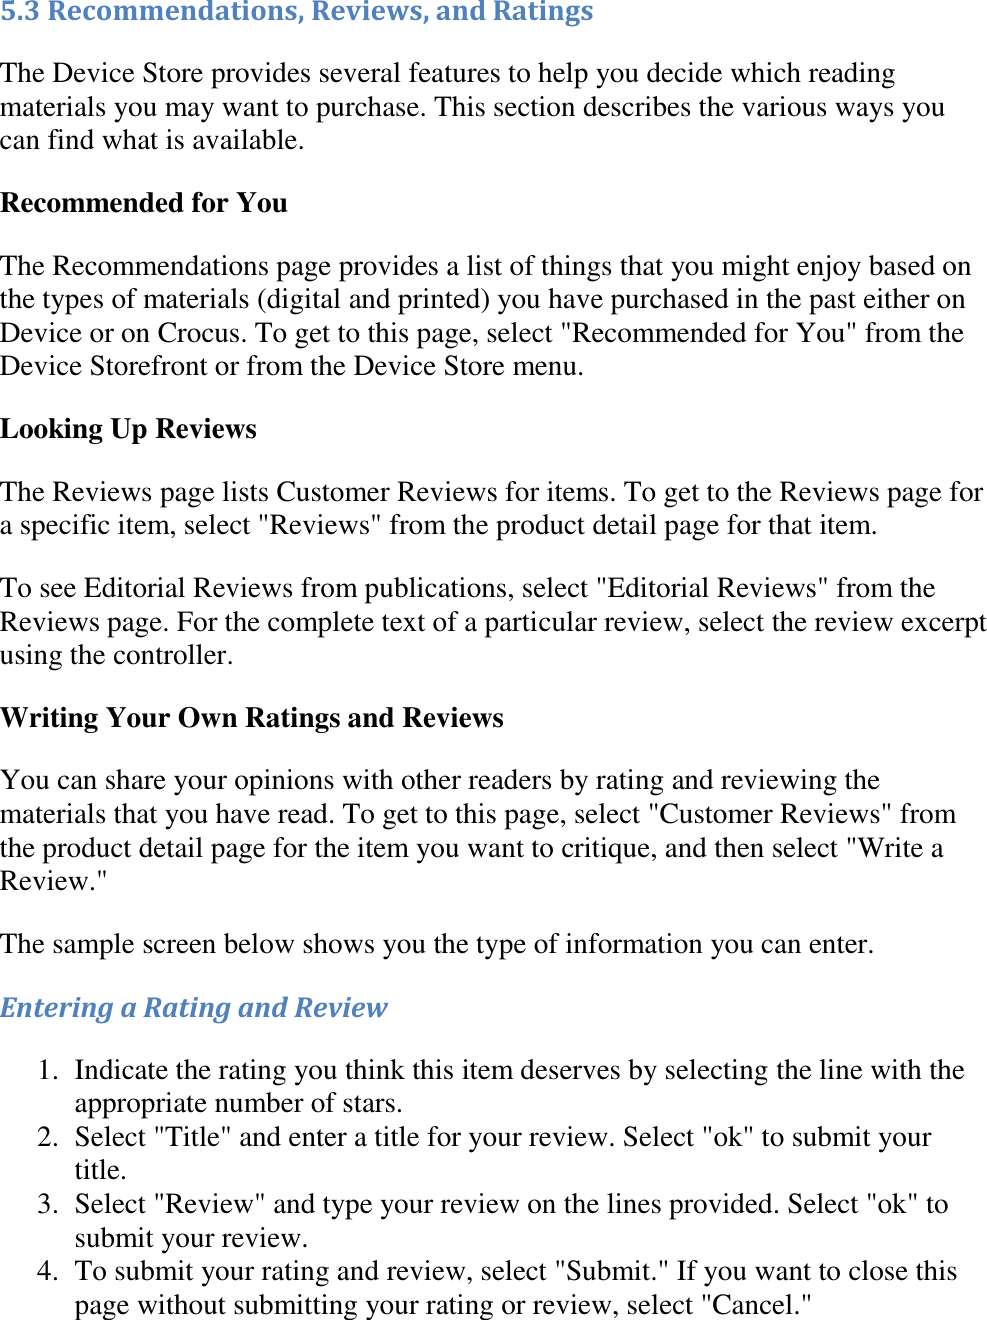   5.3 Recommendations, Reviews, and Ratings The Device Store provides several features to help you decide which reading materials you may want to purchase. This section describes the various ways you can find what is available. Recommended for You The Recommendations page provides a list of things that you might enjoy based on the types of materials (digital and printed) you have purchased in the past either on Device or on Crocus. To get to this page, select &quot;Recommended for You&quot; from the Device Storefront or from the Device Store menu. Looking Up Reviews The Reviews page lists Customer Reviews for items. To get to the Reviews page for a specific item, select &quot;Reviews&quot; from the product detail page for that item. To see Editorial Reviews from publications, select &quot;Editorial Reviews&quot; from the Reviews page. For the complete text of a particular review, select the review excerpt using the controller. Writing Your Own Ratings and Reviews You can share your opinions with other readers by rating and reviewing the materials that you have read. To get to this page, select &quot;Customer Reviews&quot; from the product detail page for the item you want to critique, and then select &quot;Write a Review.&quot; The sample screen below shows you the type of information you can enter. Entering a Rating and Review 1. Indicate the rating you think this item deserves by selecting the line with the appropriate number of stars.  2. Select &quot;Title&quot; and enter a title for your review. Select &quot;ok&quot; to submit your title.  3. Select &quot;Review&quot; and type your review on the lines provided. Select &quot;ok&quot; to submit your review.  4. To submit your rating and review, select &quot;Submit.&quot; If you want to close this page without submitting your rating or review, select &quot;Cancel.&quot;  